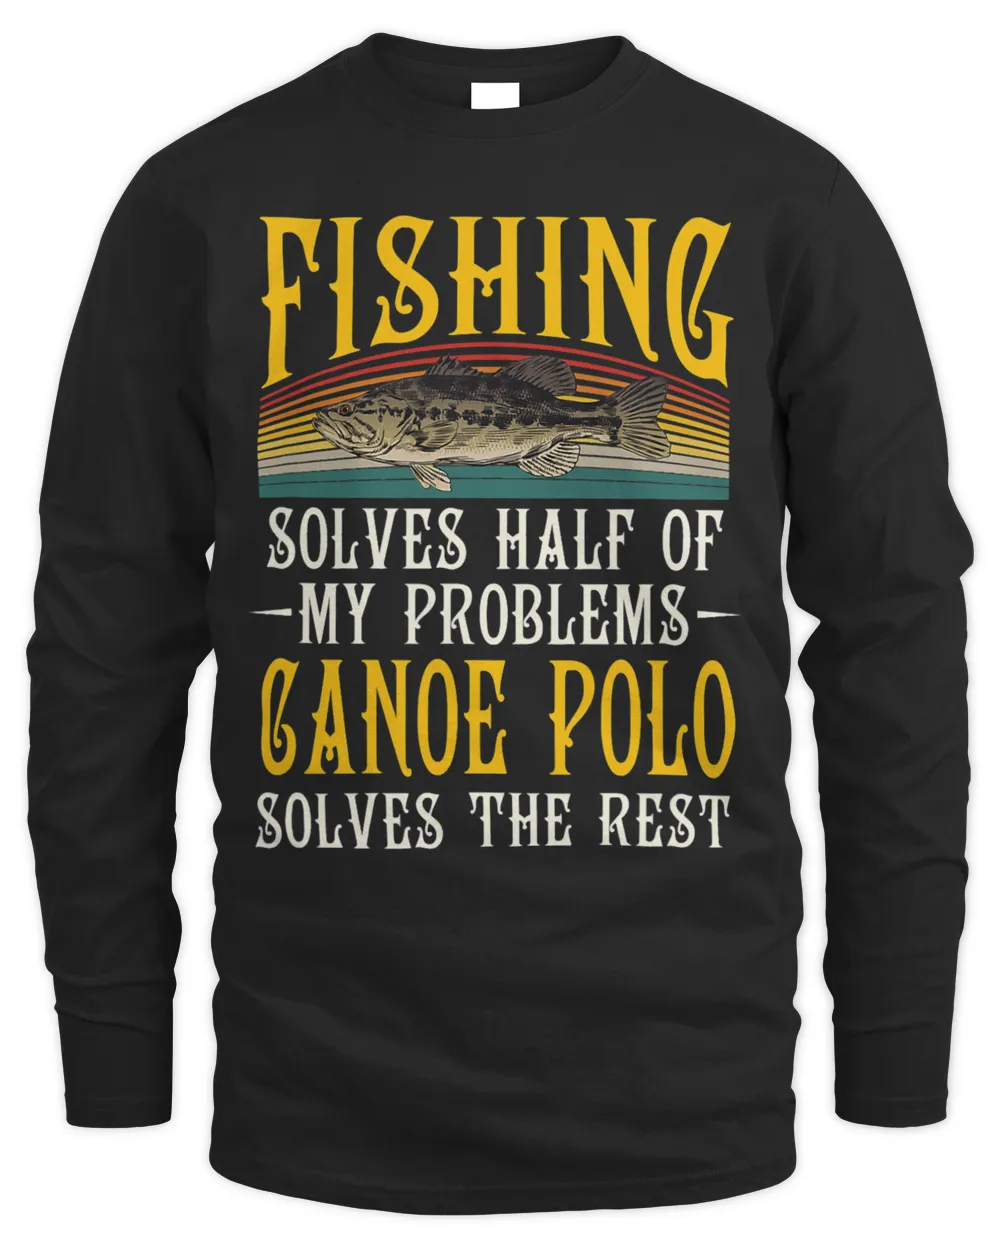 Canoe Polo Solves the Rest of My Problems Fishing Hobby